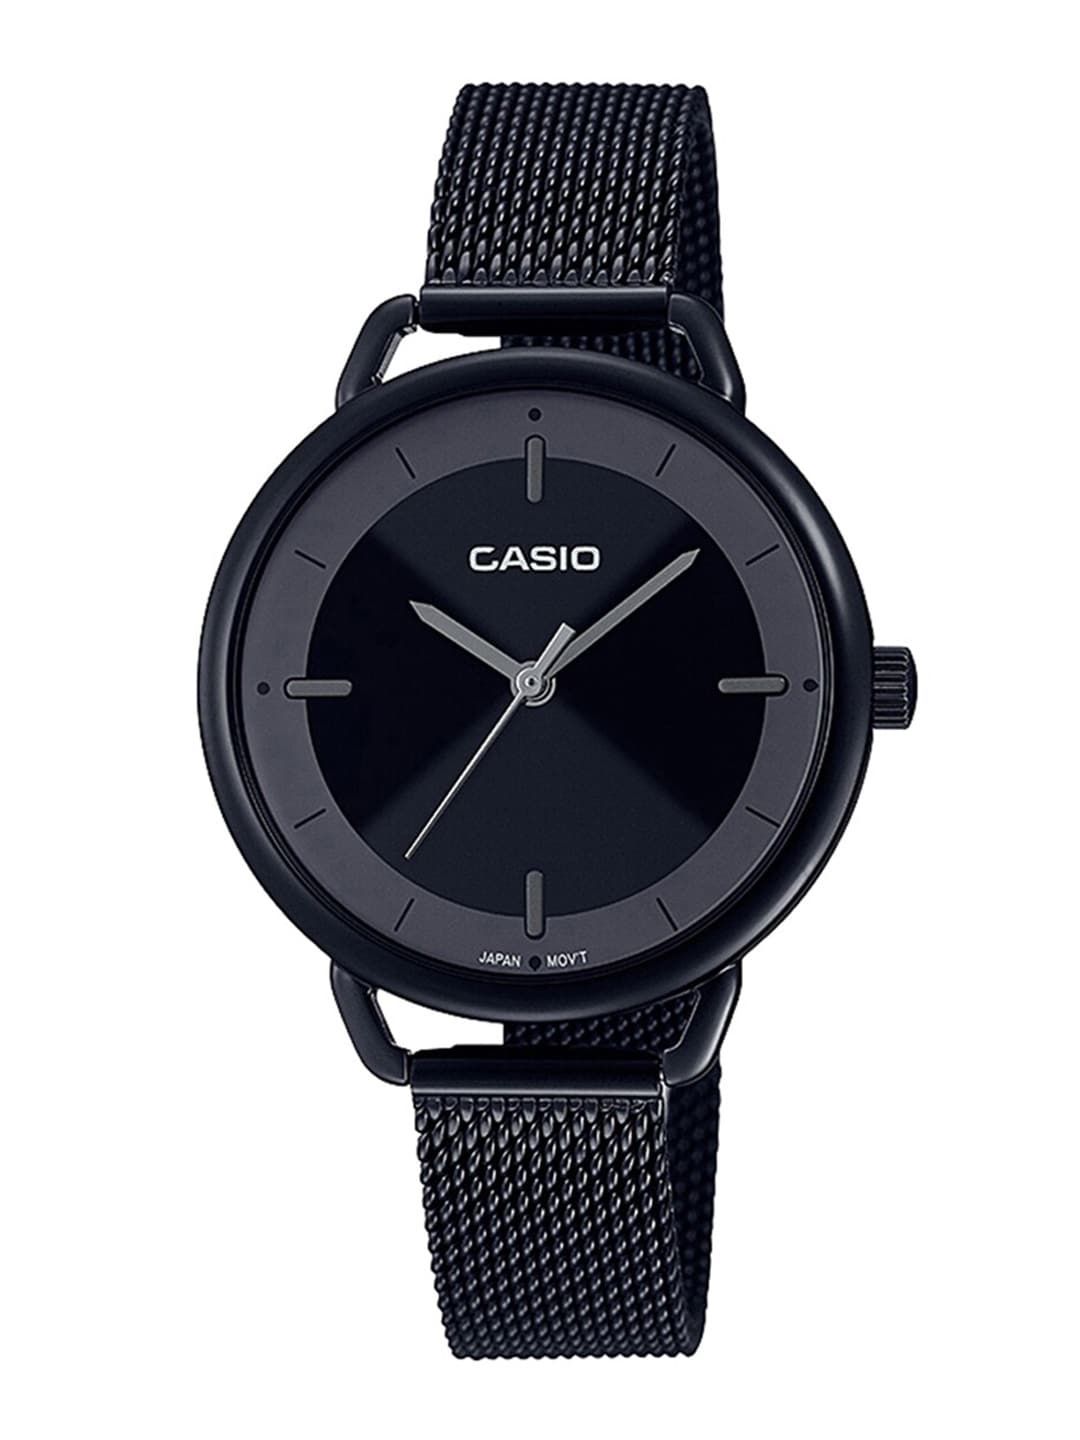 CASIO Enticer Ladies Black Analogue Watch A1798 Price in India